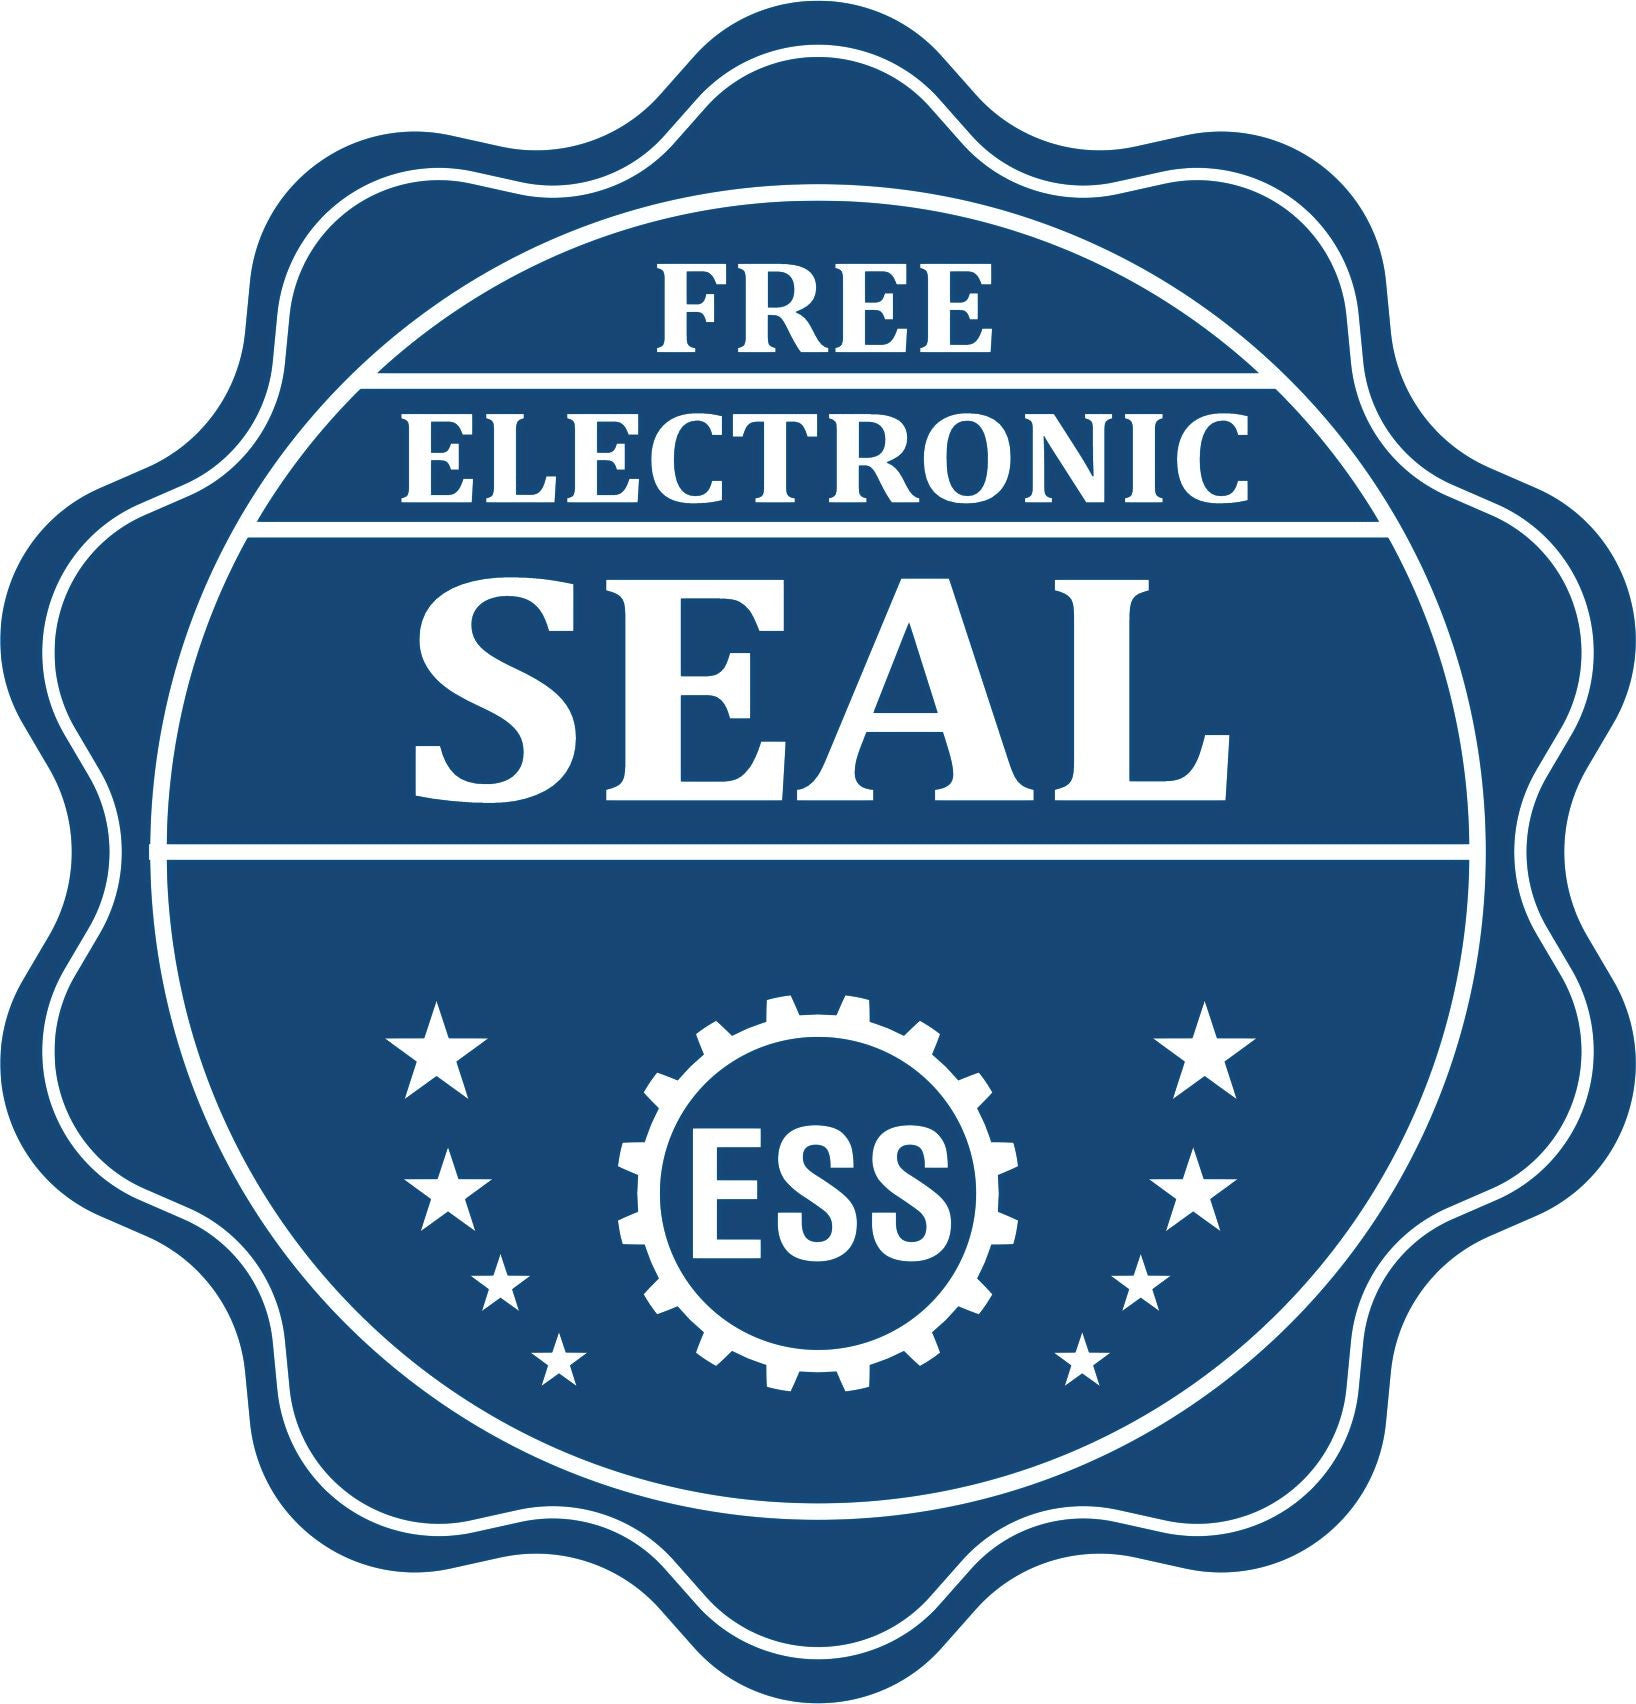 A badge showing a free electronic seal for the Premium MaxLight Pre-Inked Nebraska Landscape Architectural Stamp with stars and the ESS gear on the emblem.